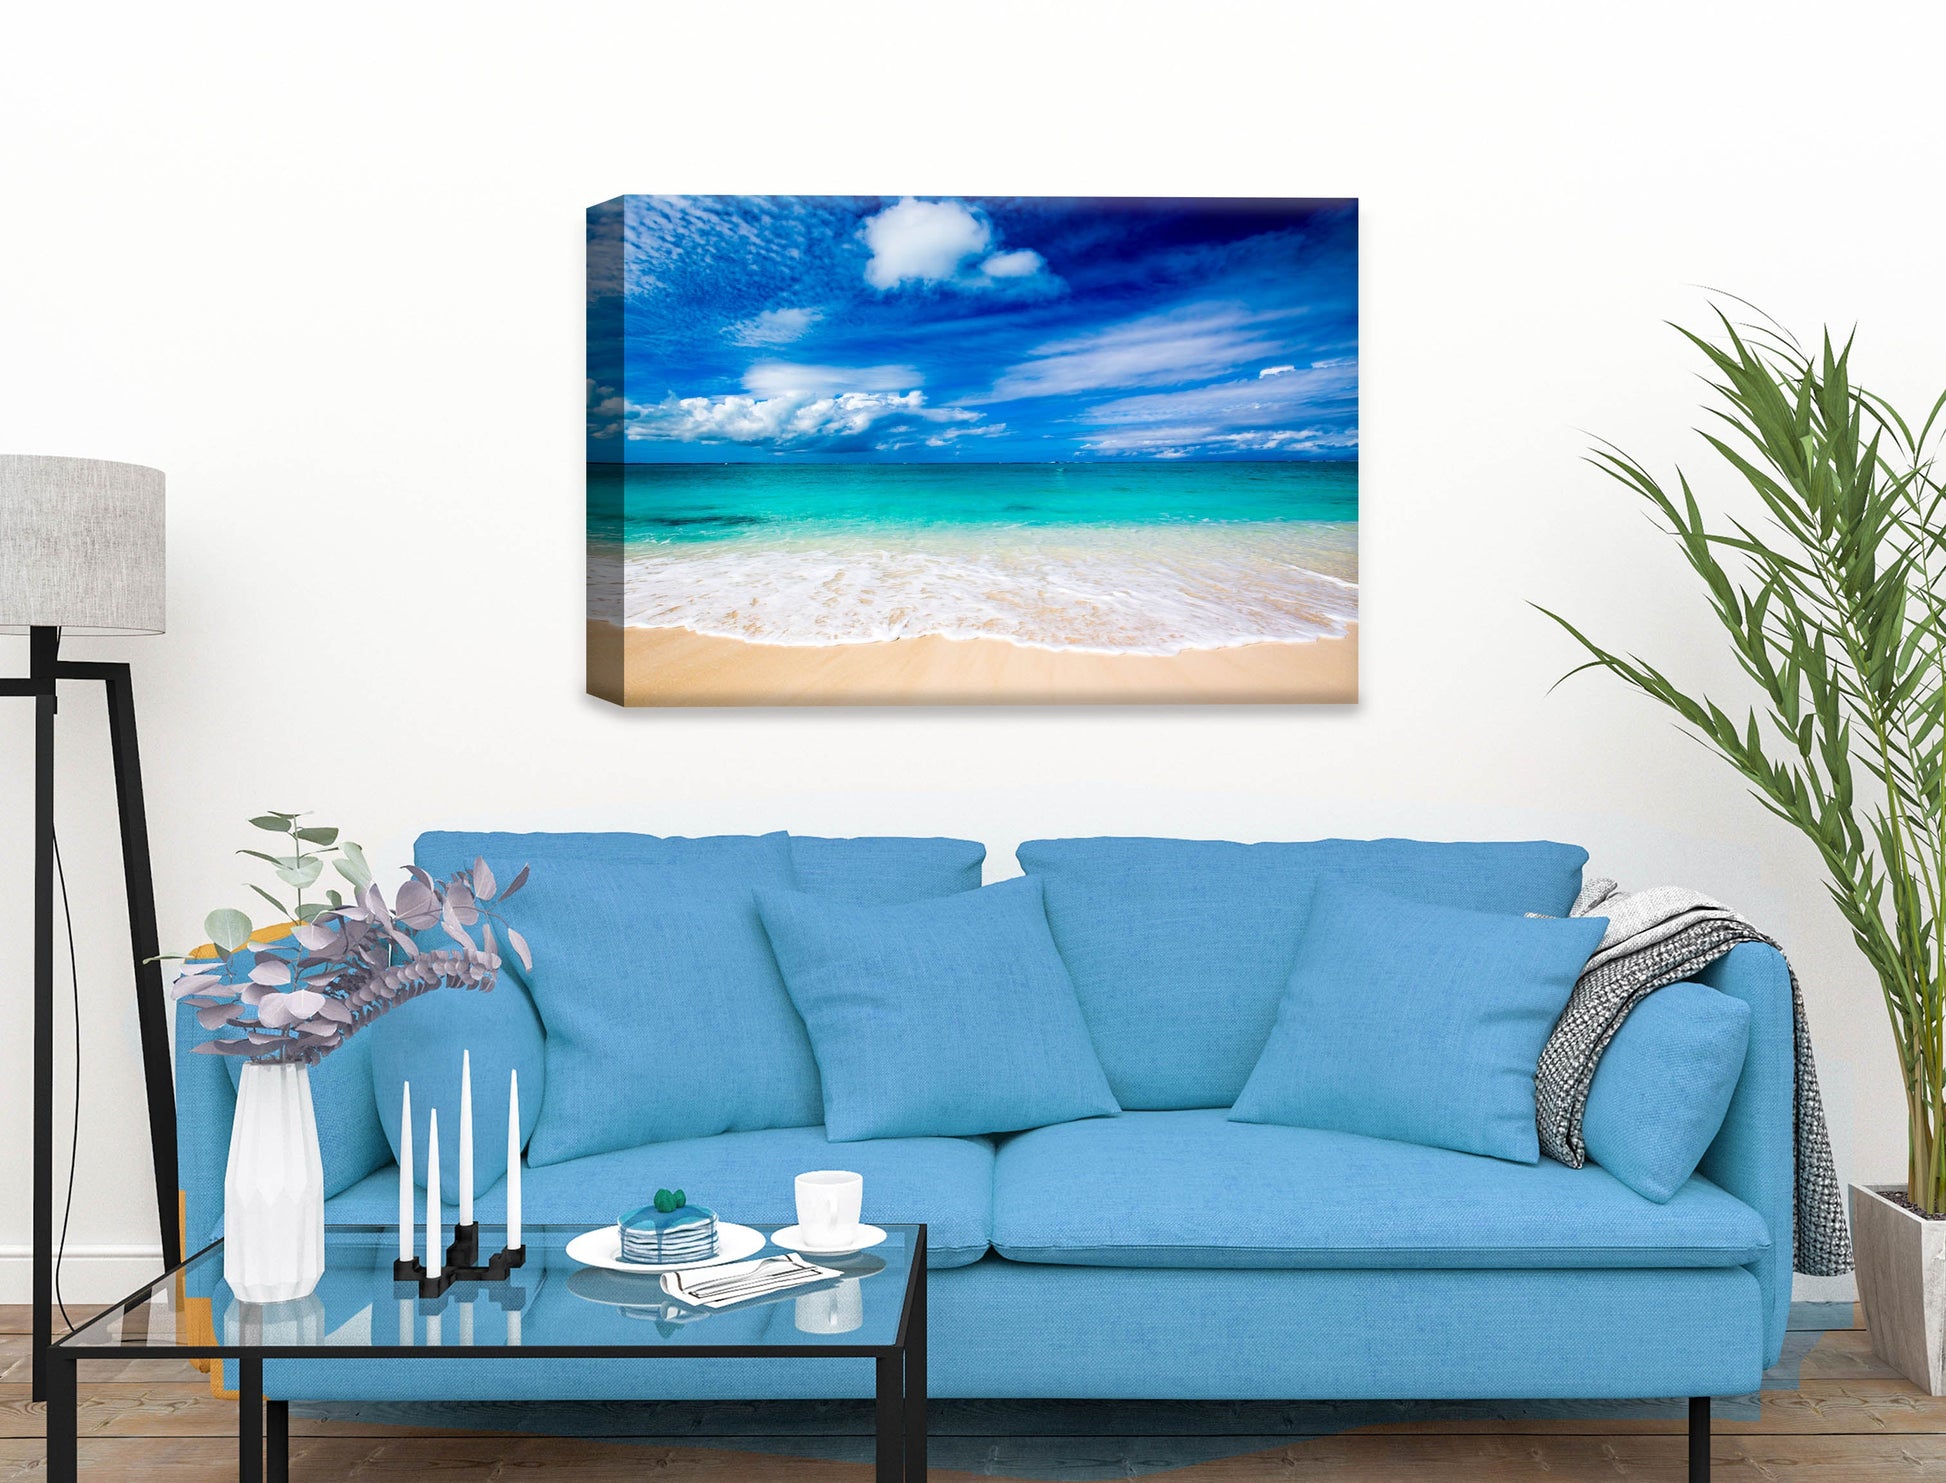 White Sand Beach - Evening on the Pond - Canvas Wrap on Living Room Wall - Blue Sofa